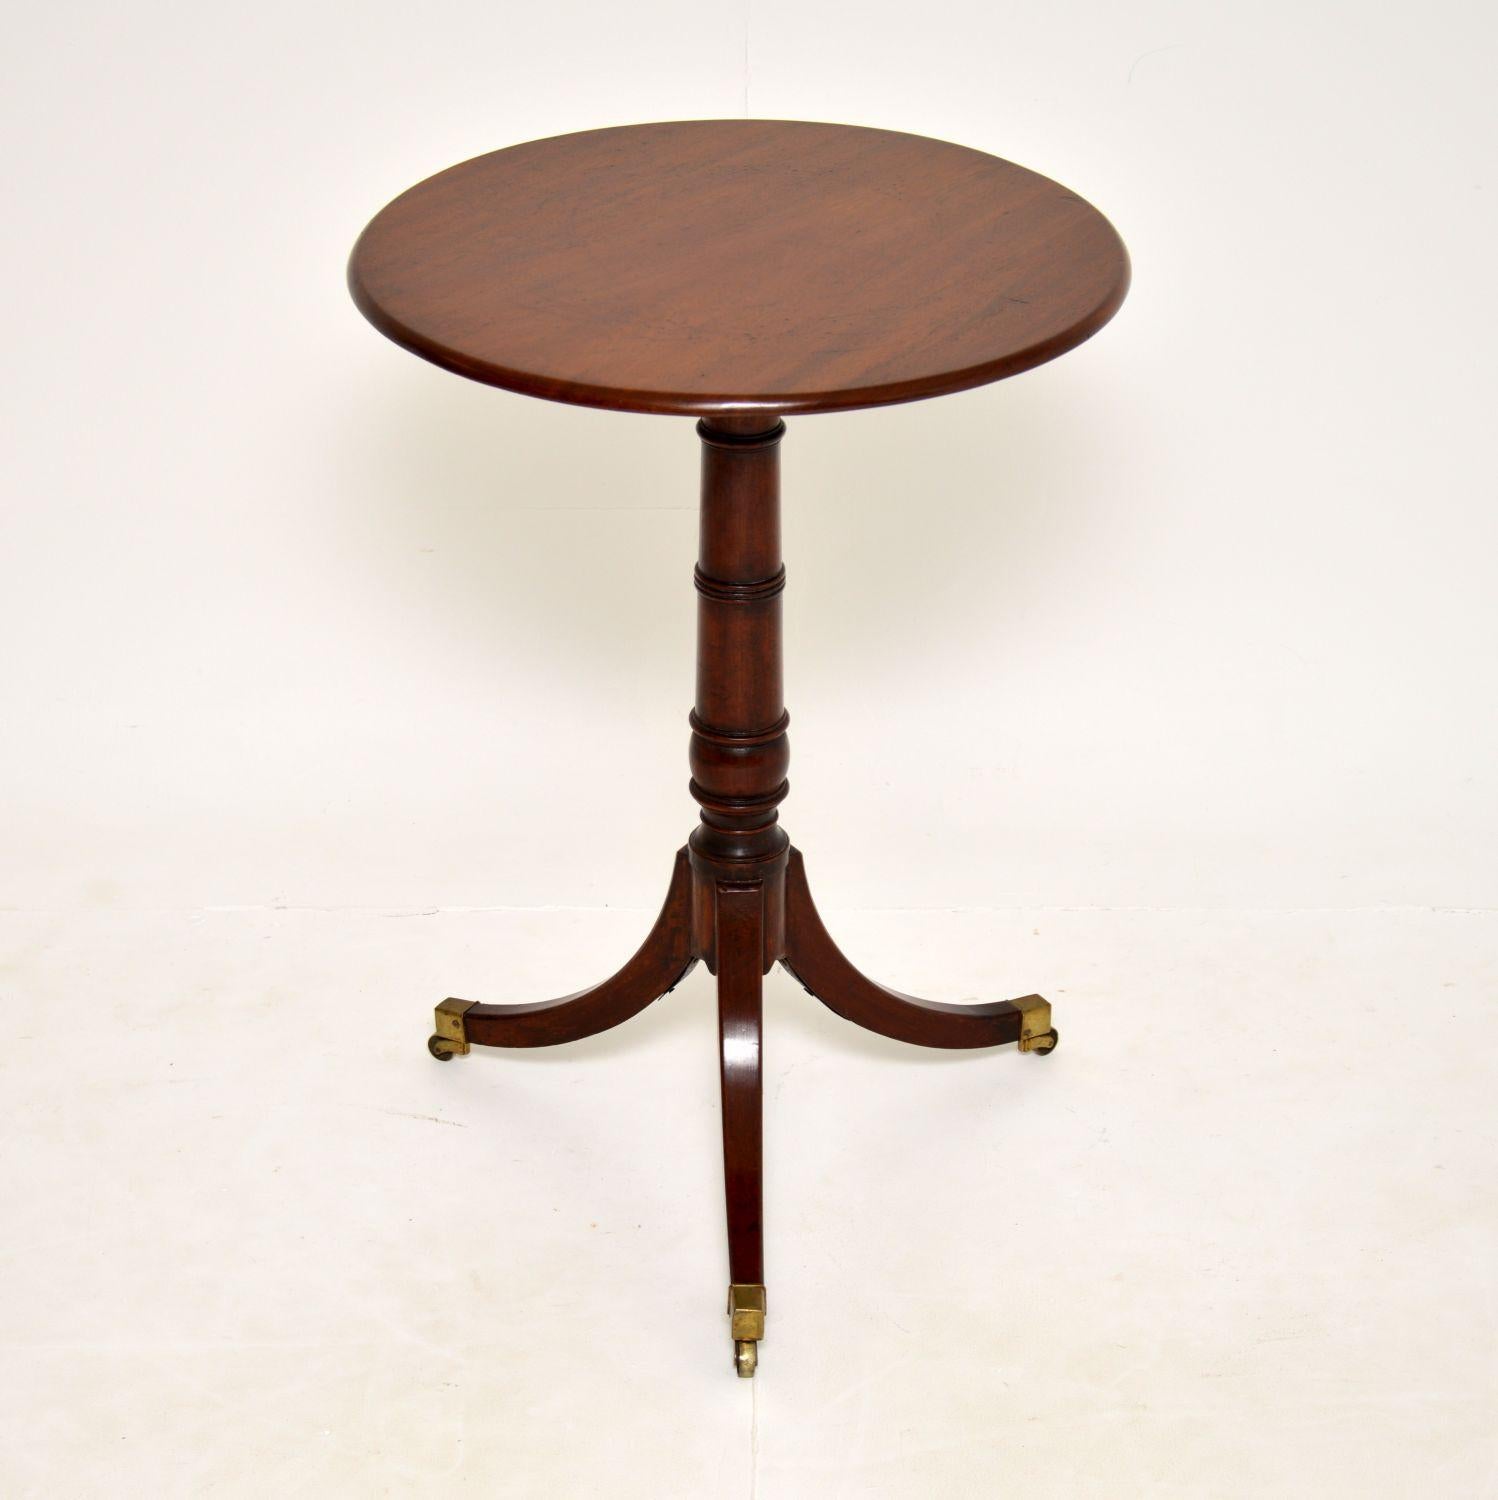 A beautiful and elegant antique Regency period occasional table. This was made in England & I would date it from around the 1810-1830’s period.

The quality is fantastic, this is very well built and sits on a well turned gun barrel base with